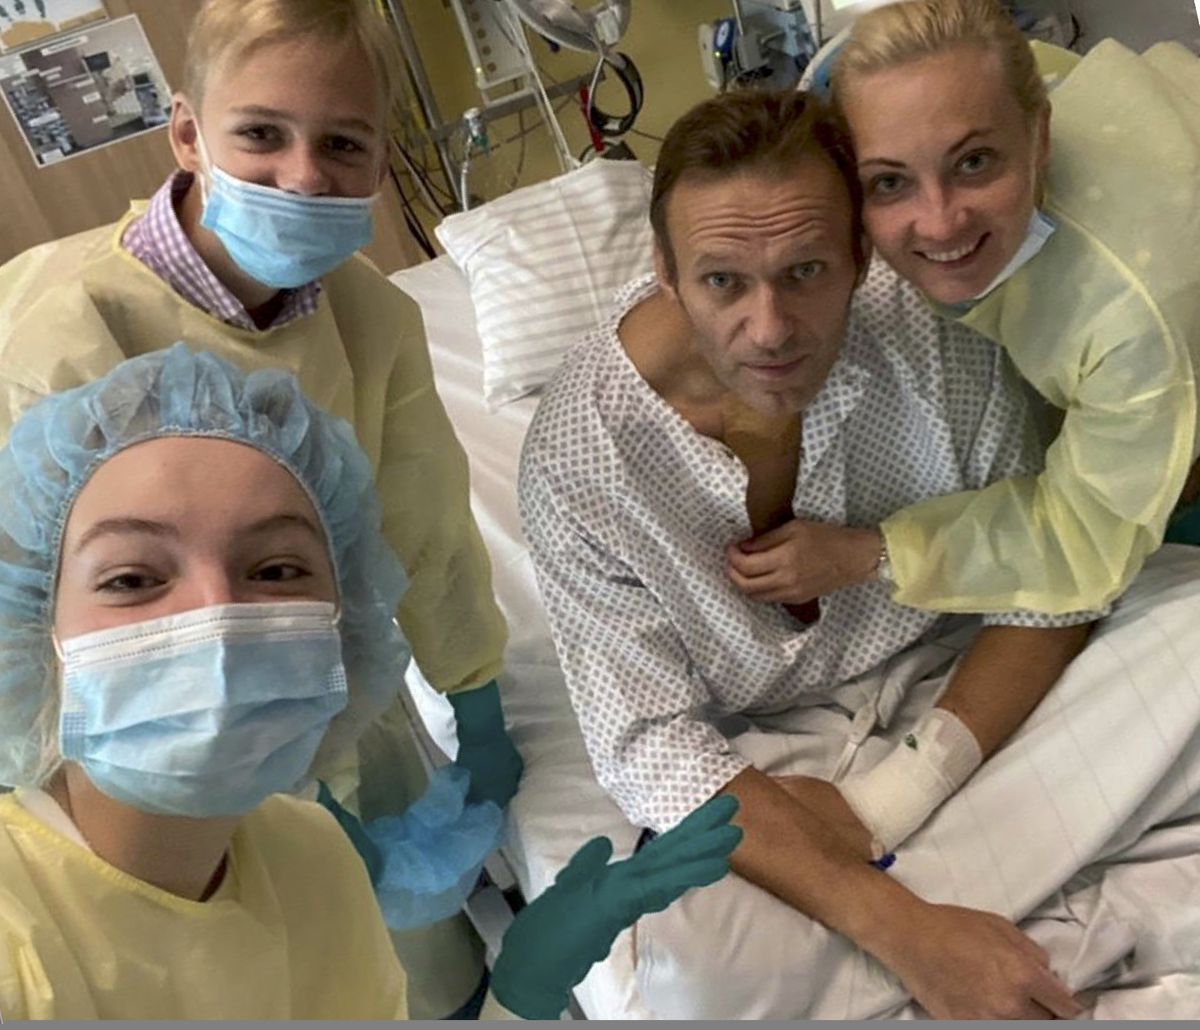 This handout photo published by Russian opposition leader Alexei Navalny on his instagram account, shows himself, centre, and his wife Yulia, right, daughter Daria, and son Zakhar, top left, posing for a photo in a hospital in Berlin, Germany. Russian opposition leader Alexei Navalny has posted the picture of himself in a hospital in Germany and says he